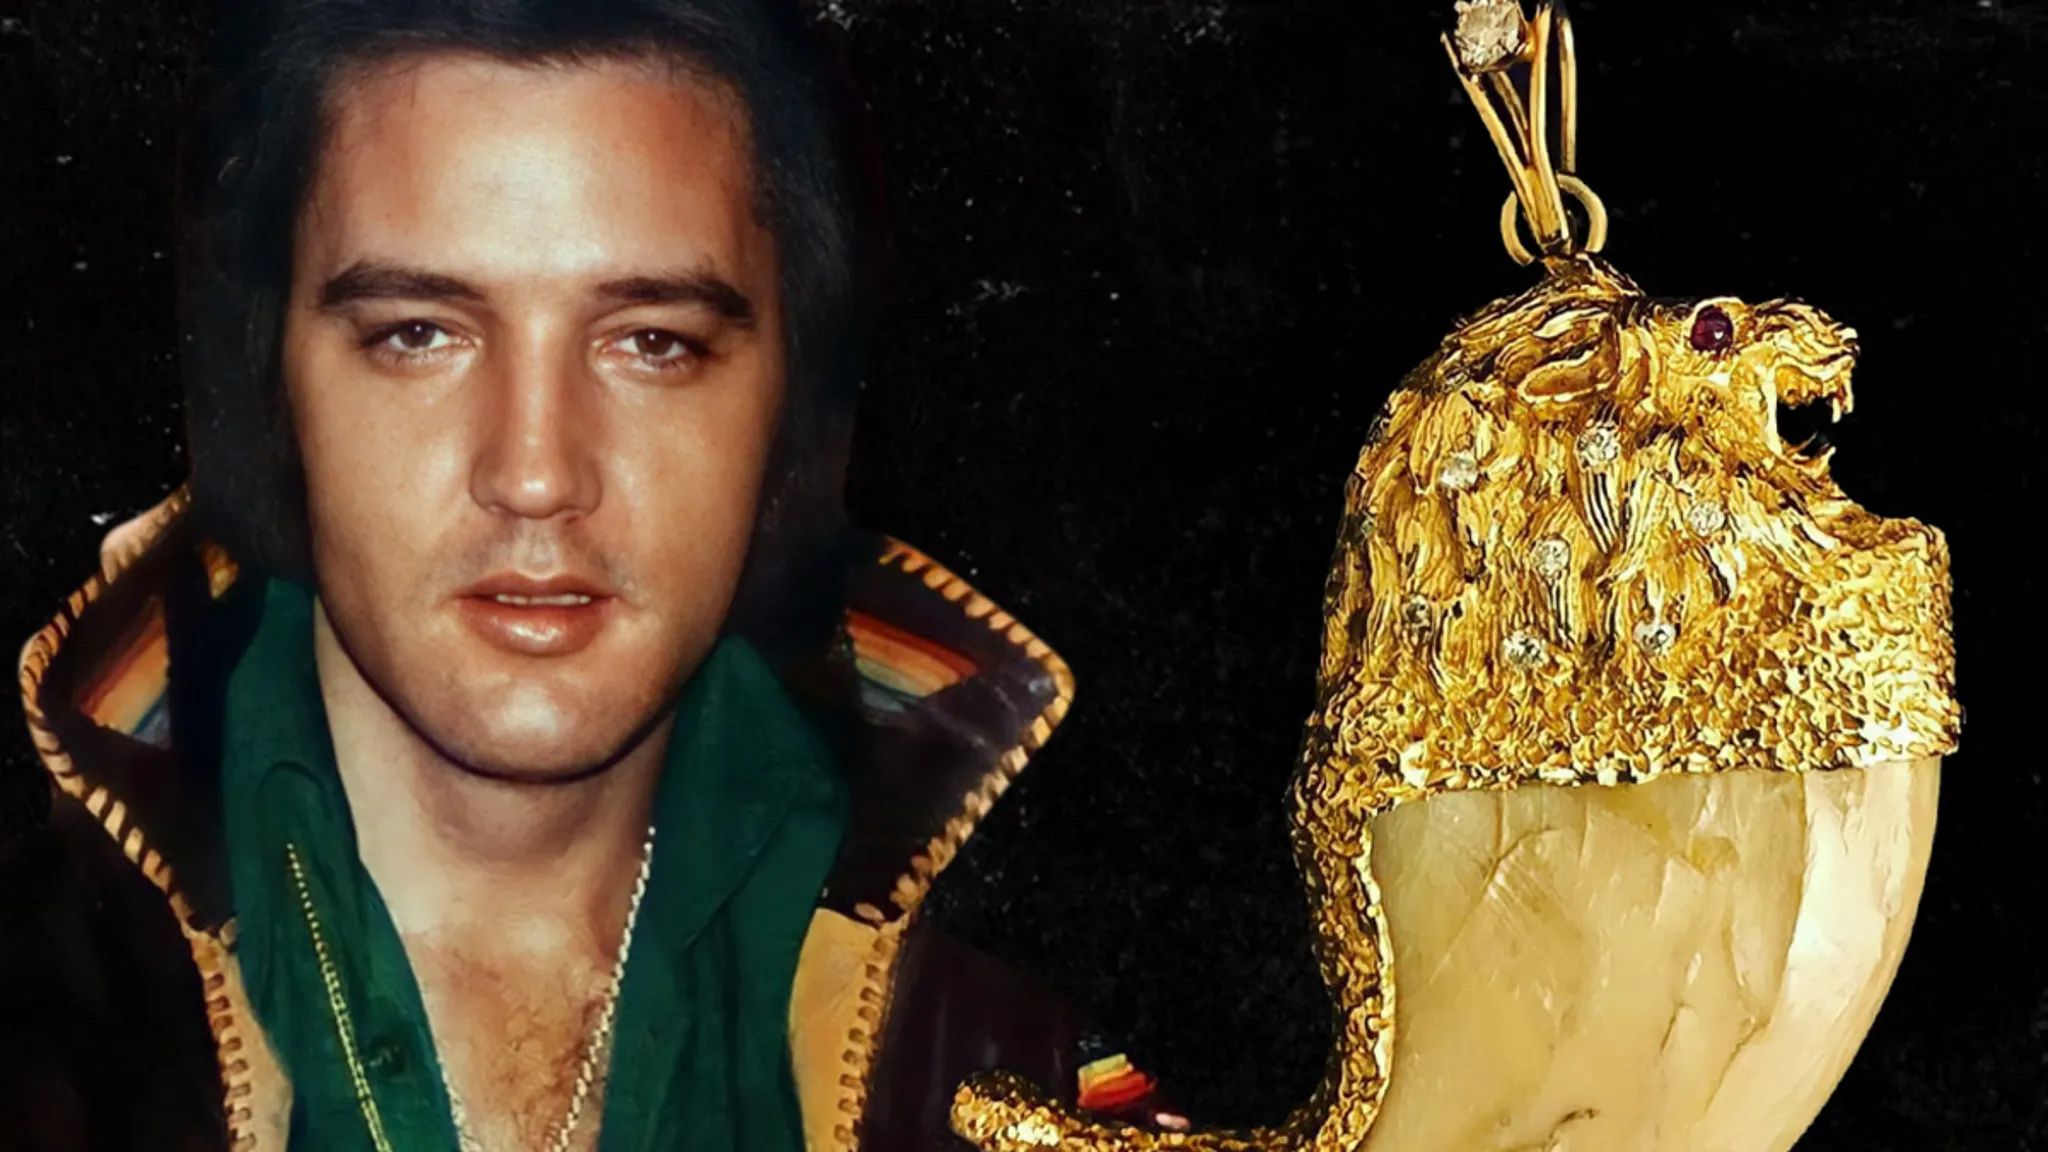 elvis-presley-lion-claw-necklace-to-be-auctioned-estimated-value-at-500k